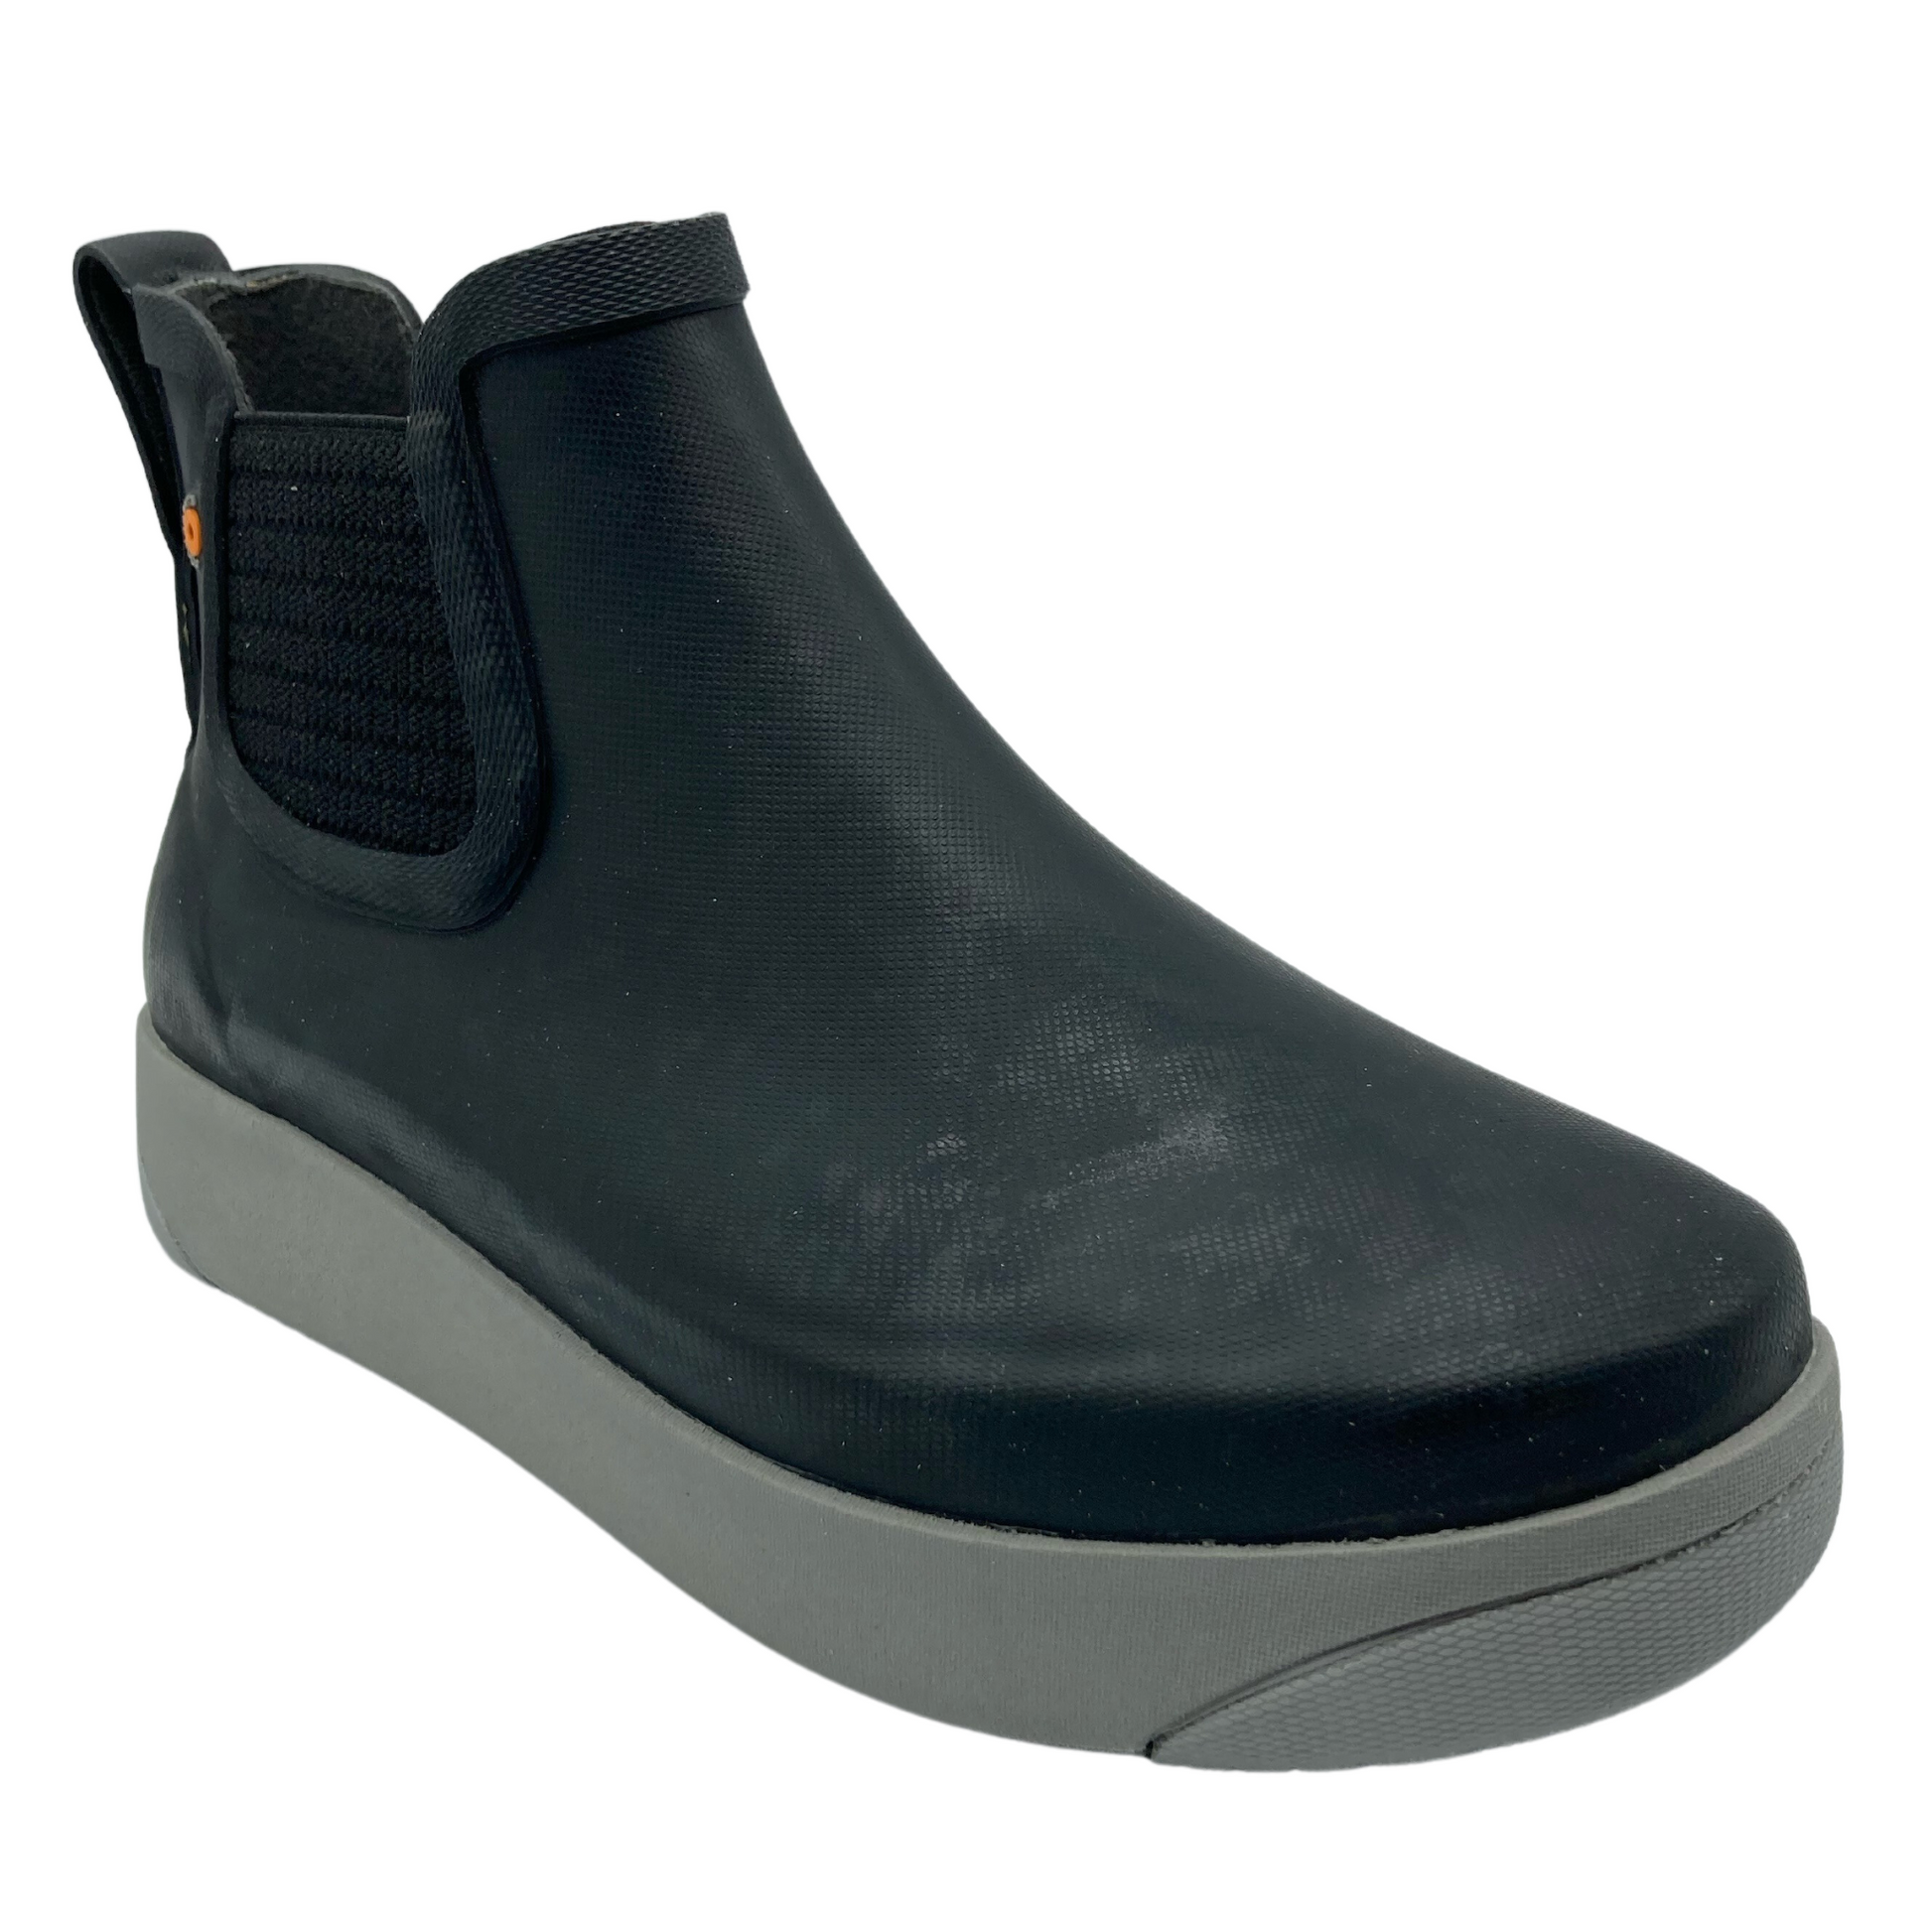 45 degree angled view of black short boot with grey rubber outsole and elastic side gore